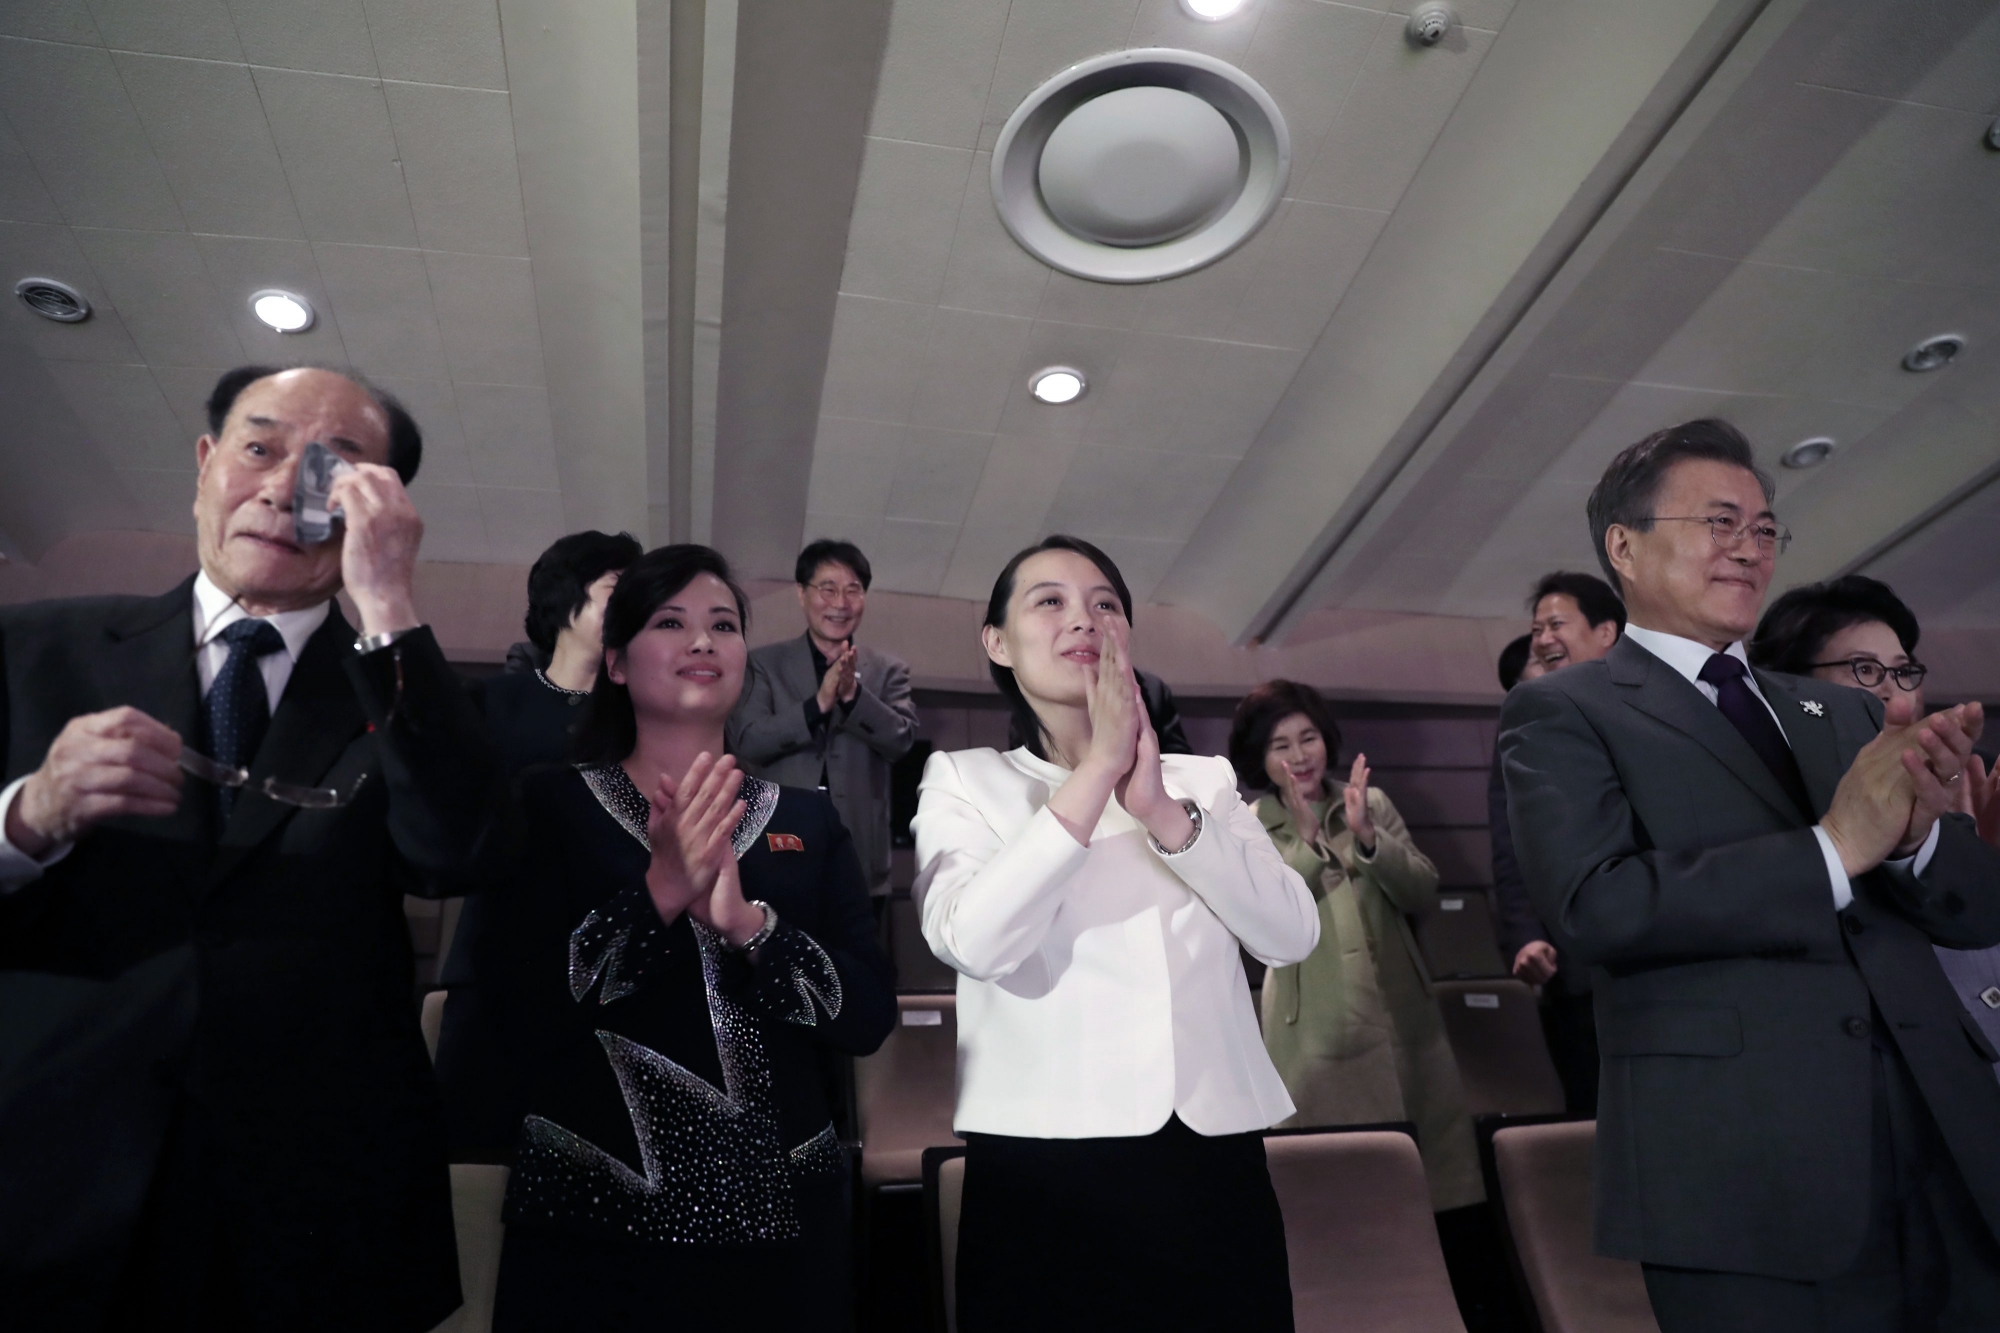 North Korea's nominal head of state Kim Yong Nam, left, wipes his tears as South Koran President Moon Jae-in, right, Kim Yo Jong, North Korean leader Kim Jong Un's sister, and Hyon Song Wol, second from left, leader of North Korea's Samjiyon Orchestra, applaud after a performance of North Korea's Samjiyon Orchestra at National Theater in Seoul, South Korea, Sunday, Feb. 11, 2018. A rare invitation to Pyongyang for South Korea's president marked Day Two of the North Korean Kim dynasty's southern road tour, part of an accelerating diplomatic thaw that included some Korean liquor over lunch and the shared joy of watching a "unified" Korea team play hockey at the Olympics. (Bee Jae-man/Yonhap via AP) South Korea Koreas Olympics